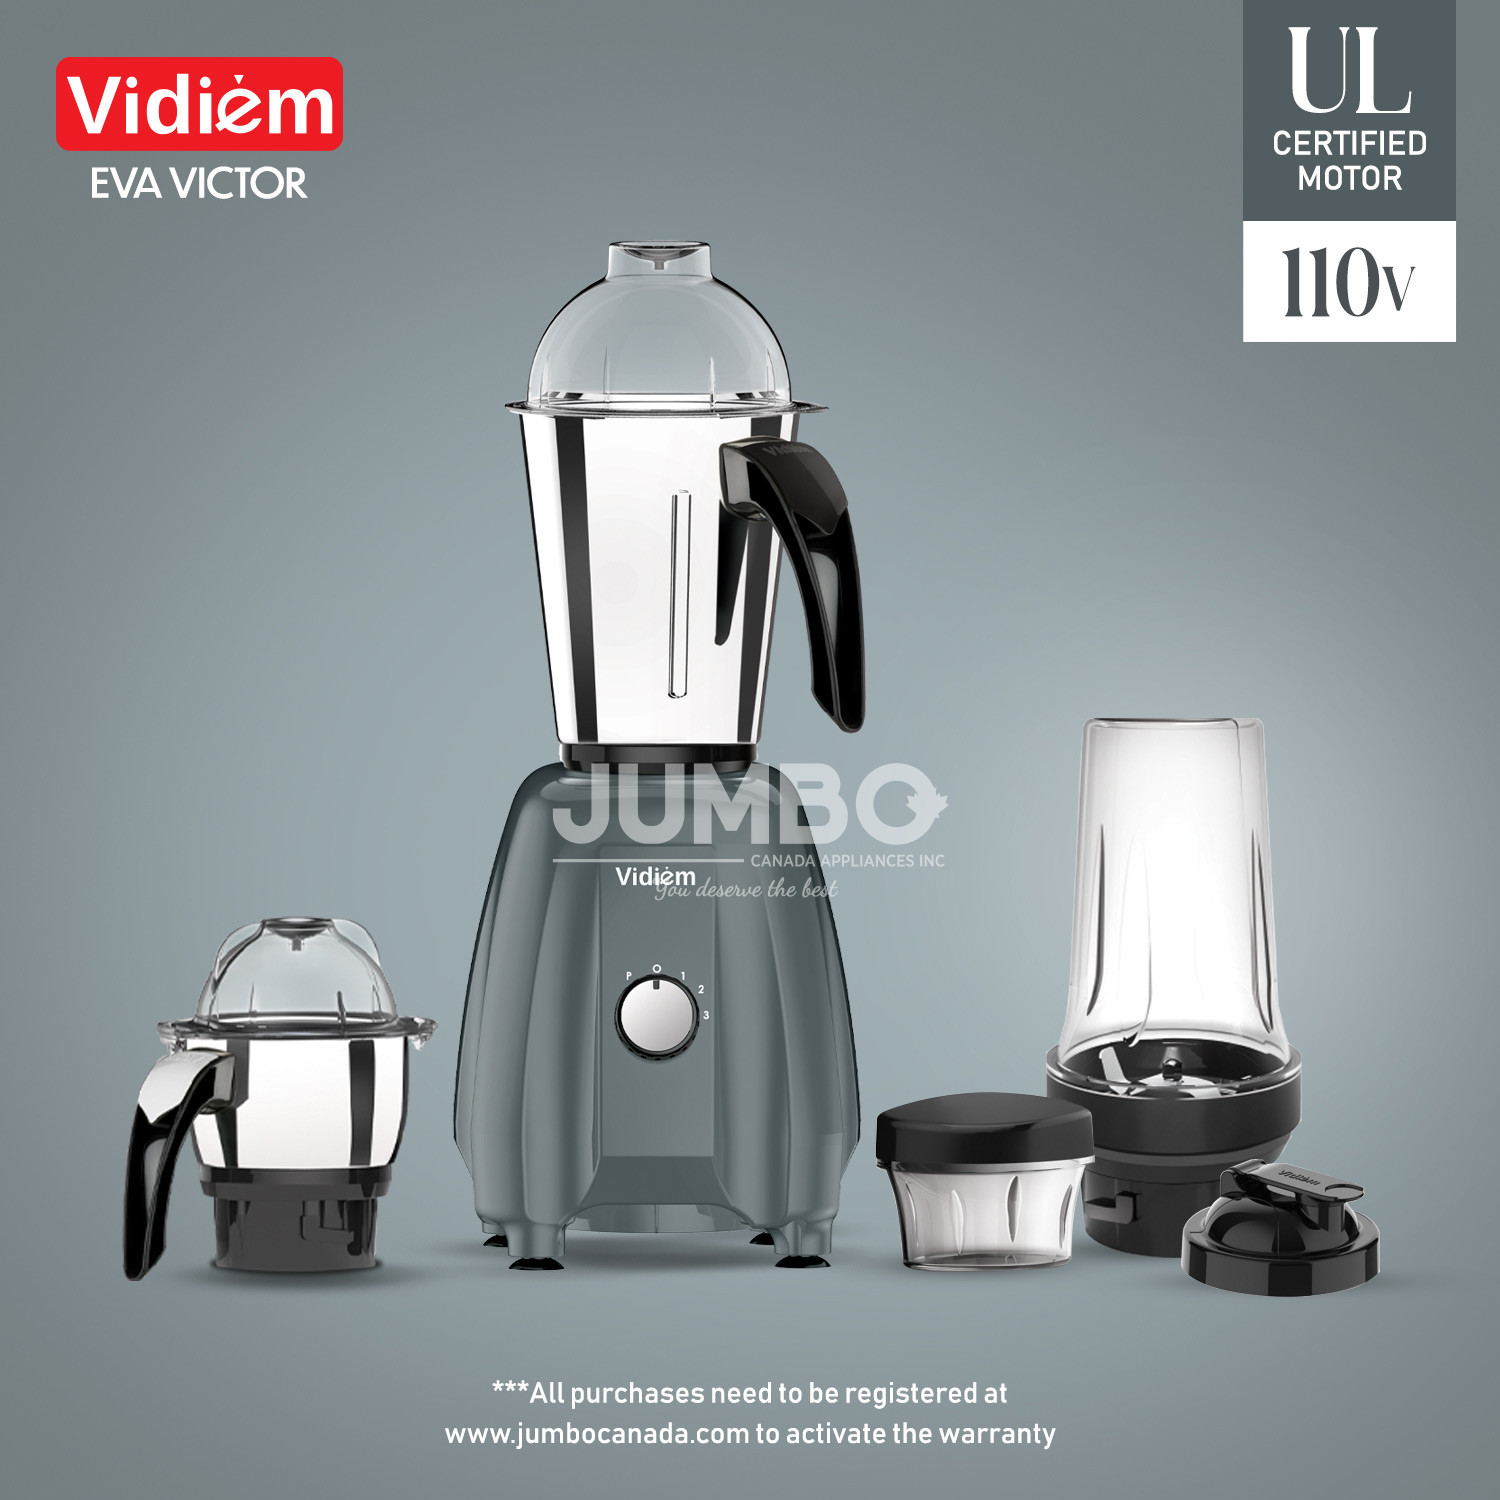 vidiem-eva-victor-pro-650w-110v-indian-mixer-grinder-ss-jars-250ml-spice-personal-coffee-herbs-grinder-with-500ml-personal-juices-shakes-smoothie-blender-made-for-canada-usa8